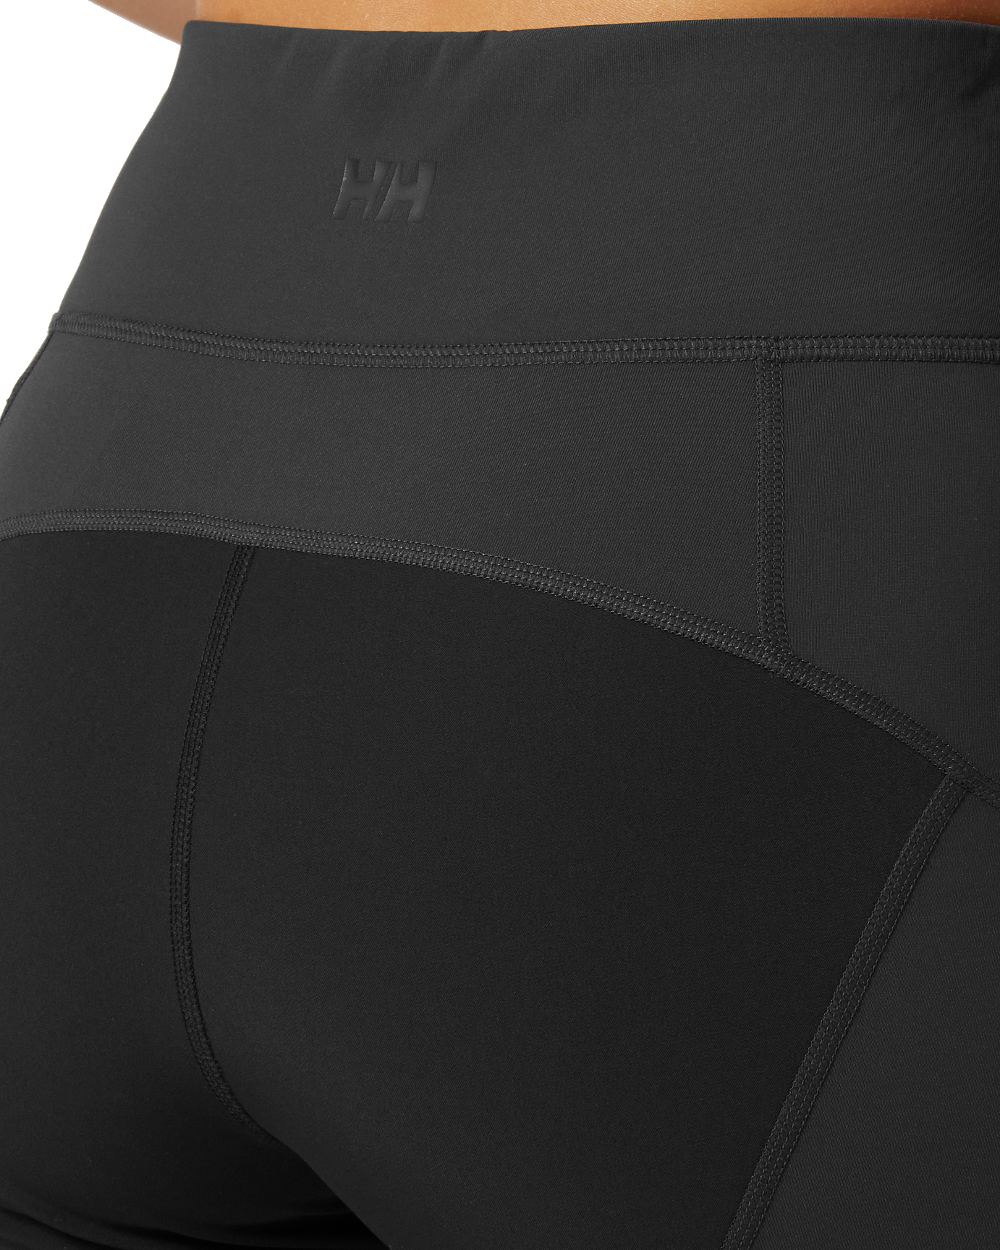 Ebony coloured Helly Hansen womens deck tough sailing tights on white background 